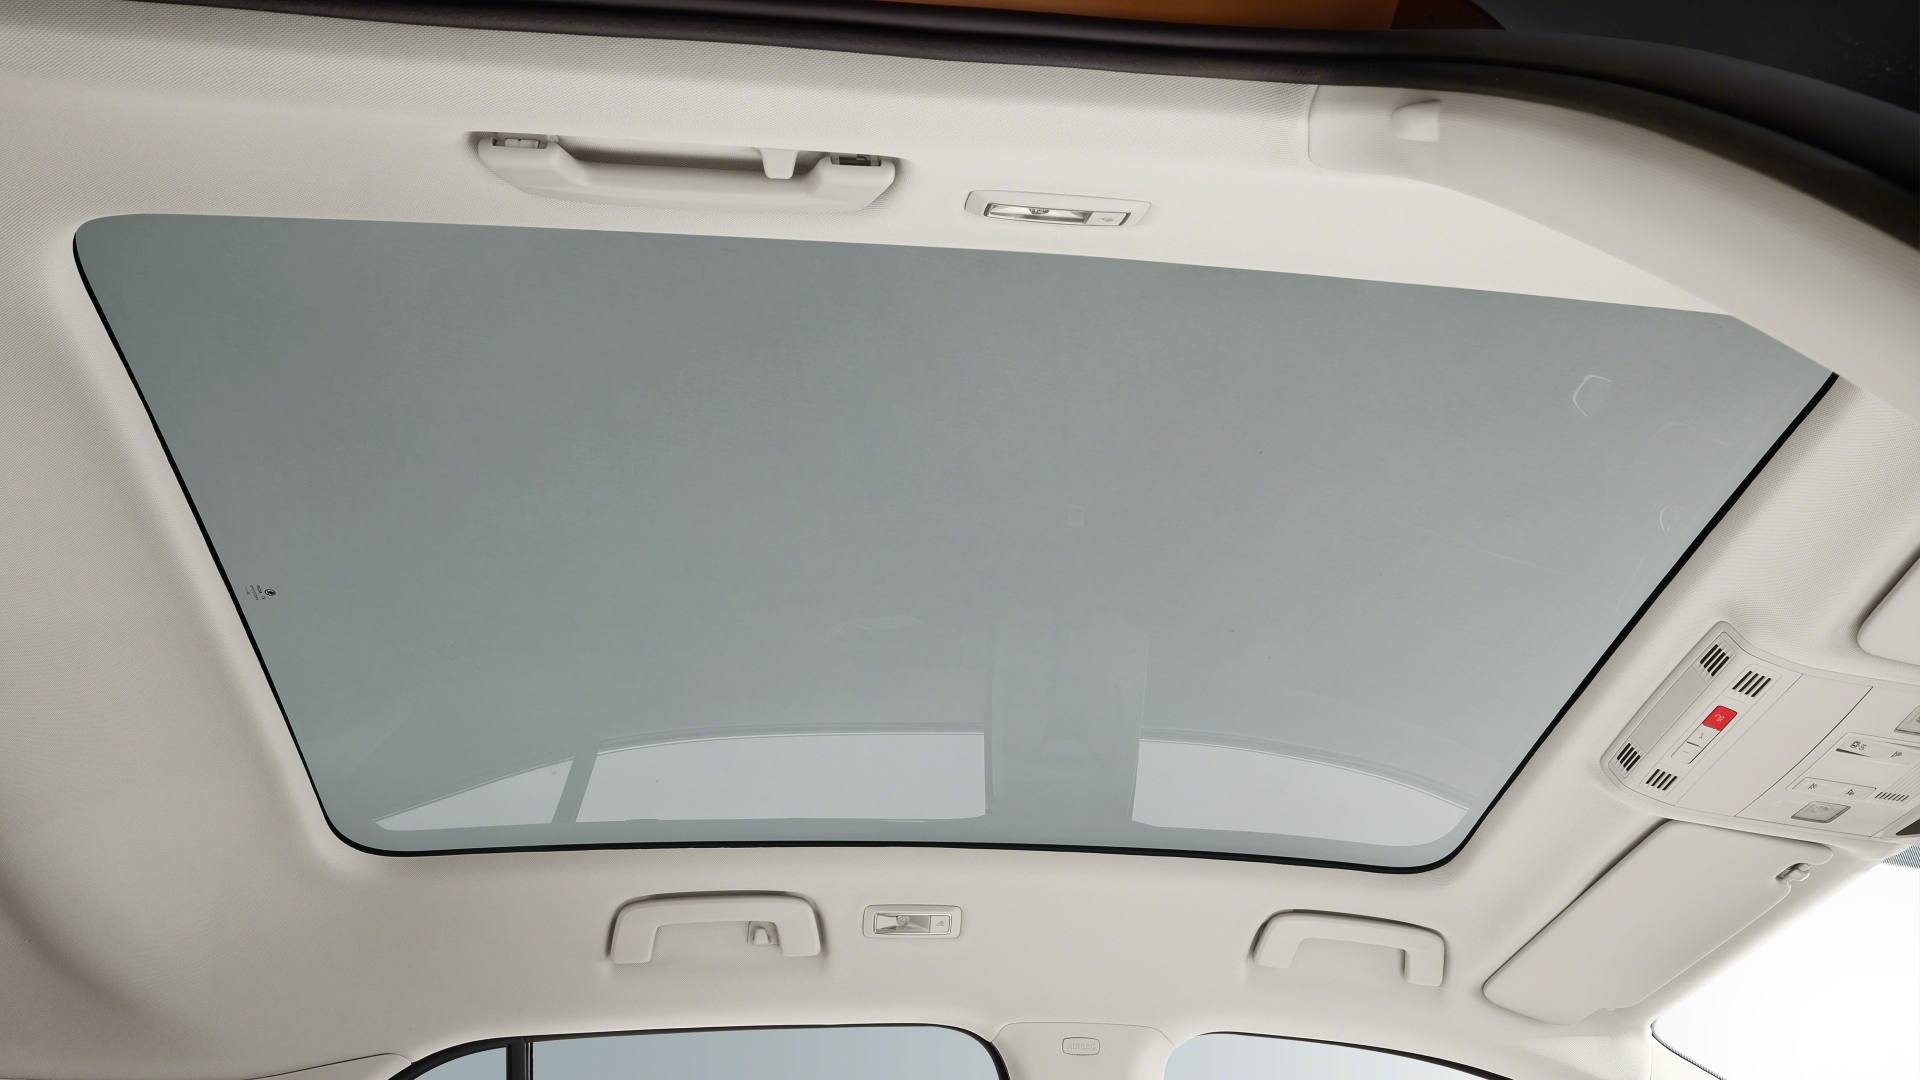 Panoramic sunroof will certainly enhance feeling of airiness inside the new Fabia. Image: Skoda